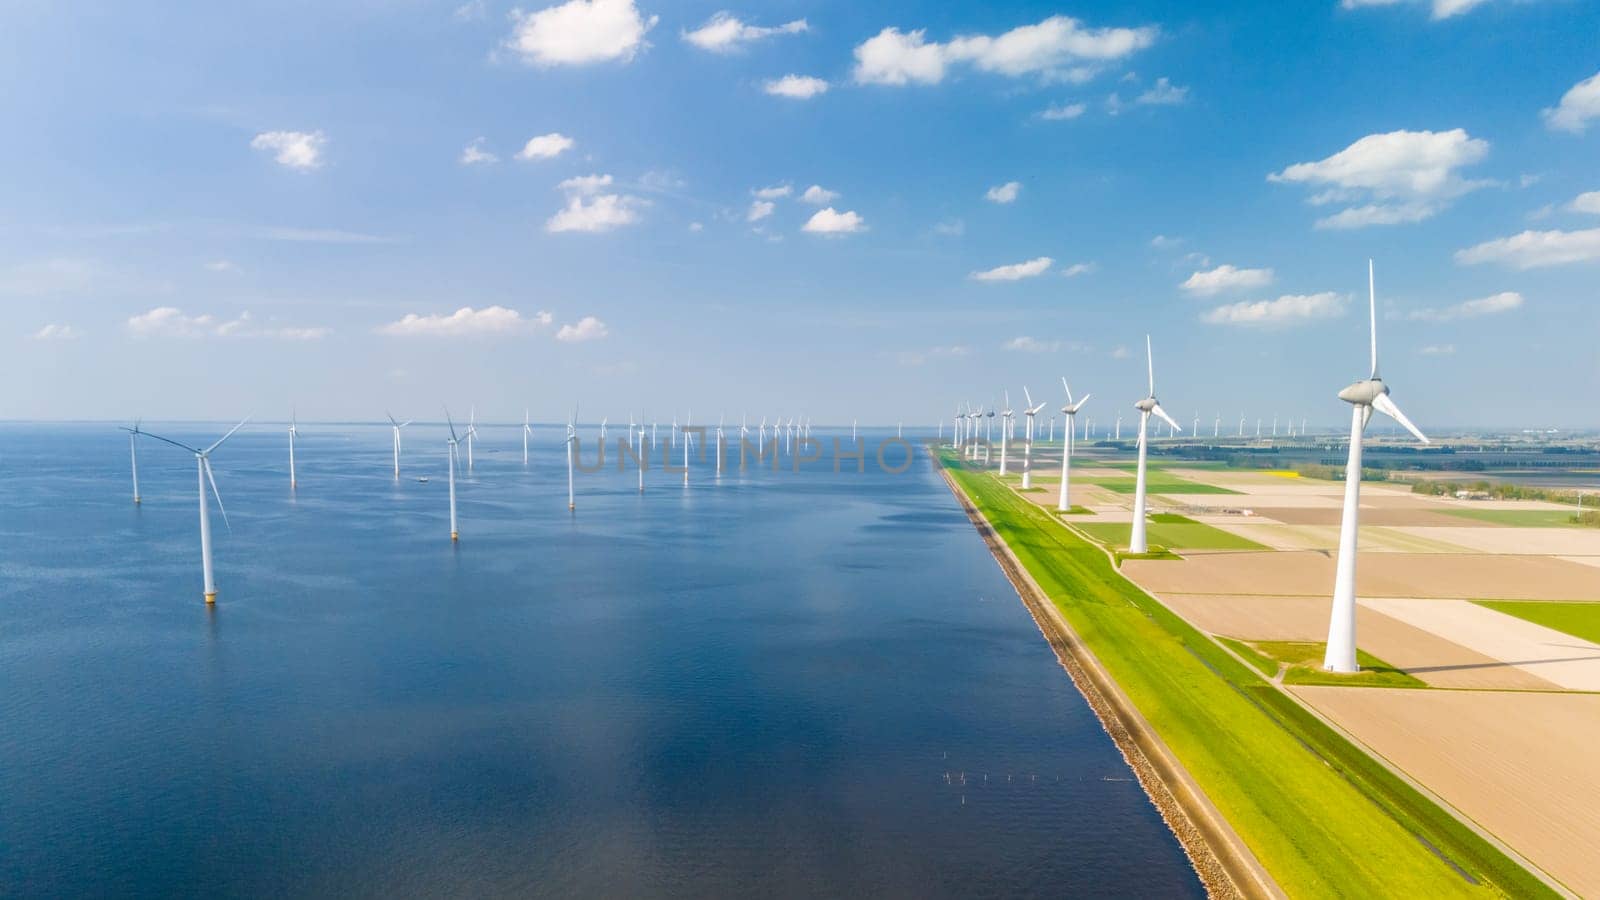 A mesmerizing overhead view captures the graceful dance of windmill turbines in a vast oceanic wind farm, located in the Netherlands Flevoland by fokkebok